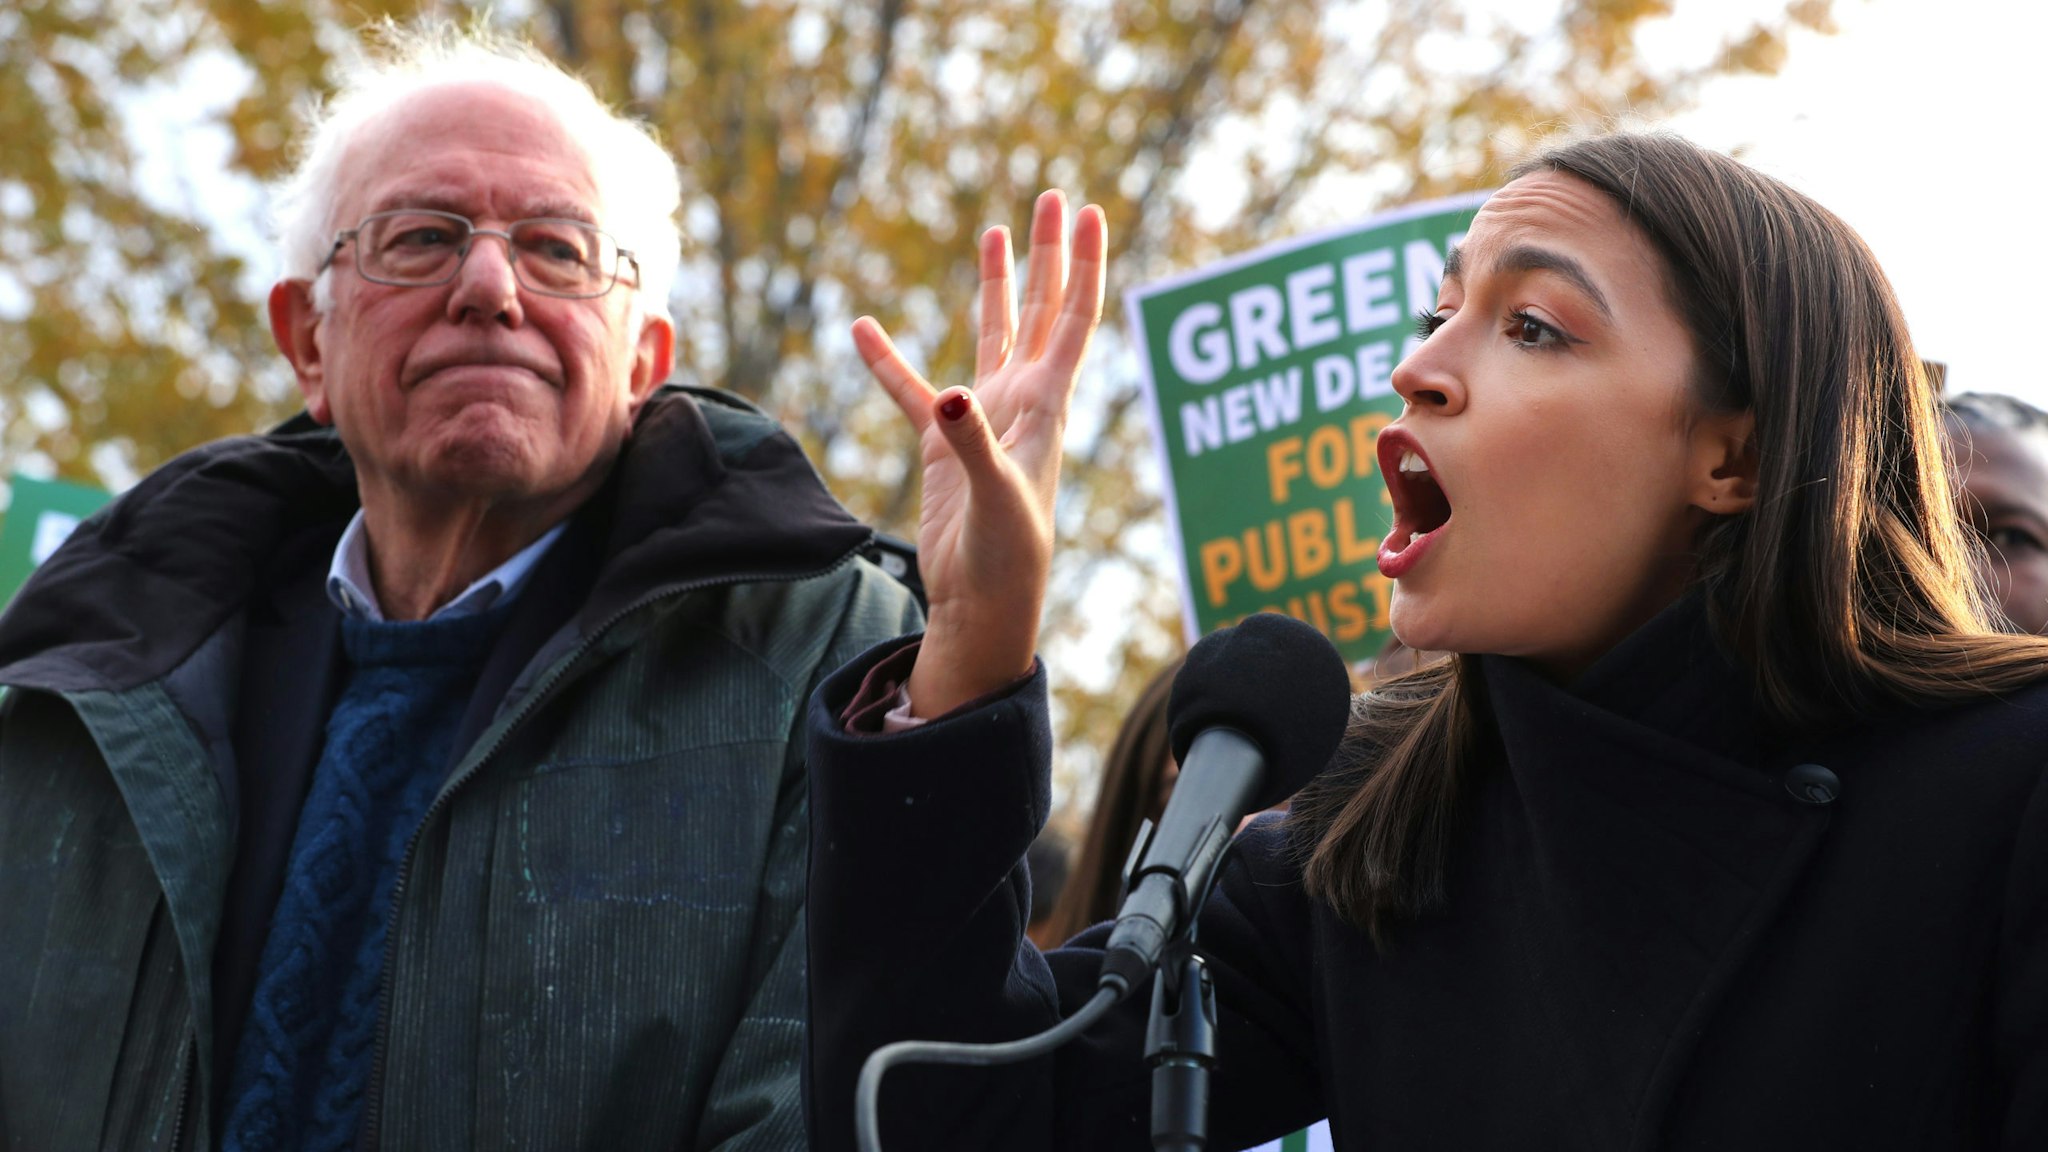 WASHINGTON, DC - NOVEMBER 14: Democratic presidential candidate Sen. Bernie Sanders (I-VT) (L) and Rep. Alexandria Ocasio-Cortez (D-NY) hold a news conference to introduce legislation to transform public housing as part of their Green New Deal proposal outside the U.S. Capitol November 14, 2019 in Washington, DC. The liberal legislators invited affordable housing advocates and climate change activists to join them for the announcement.